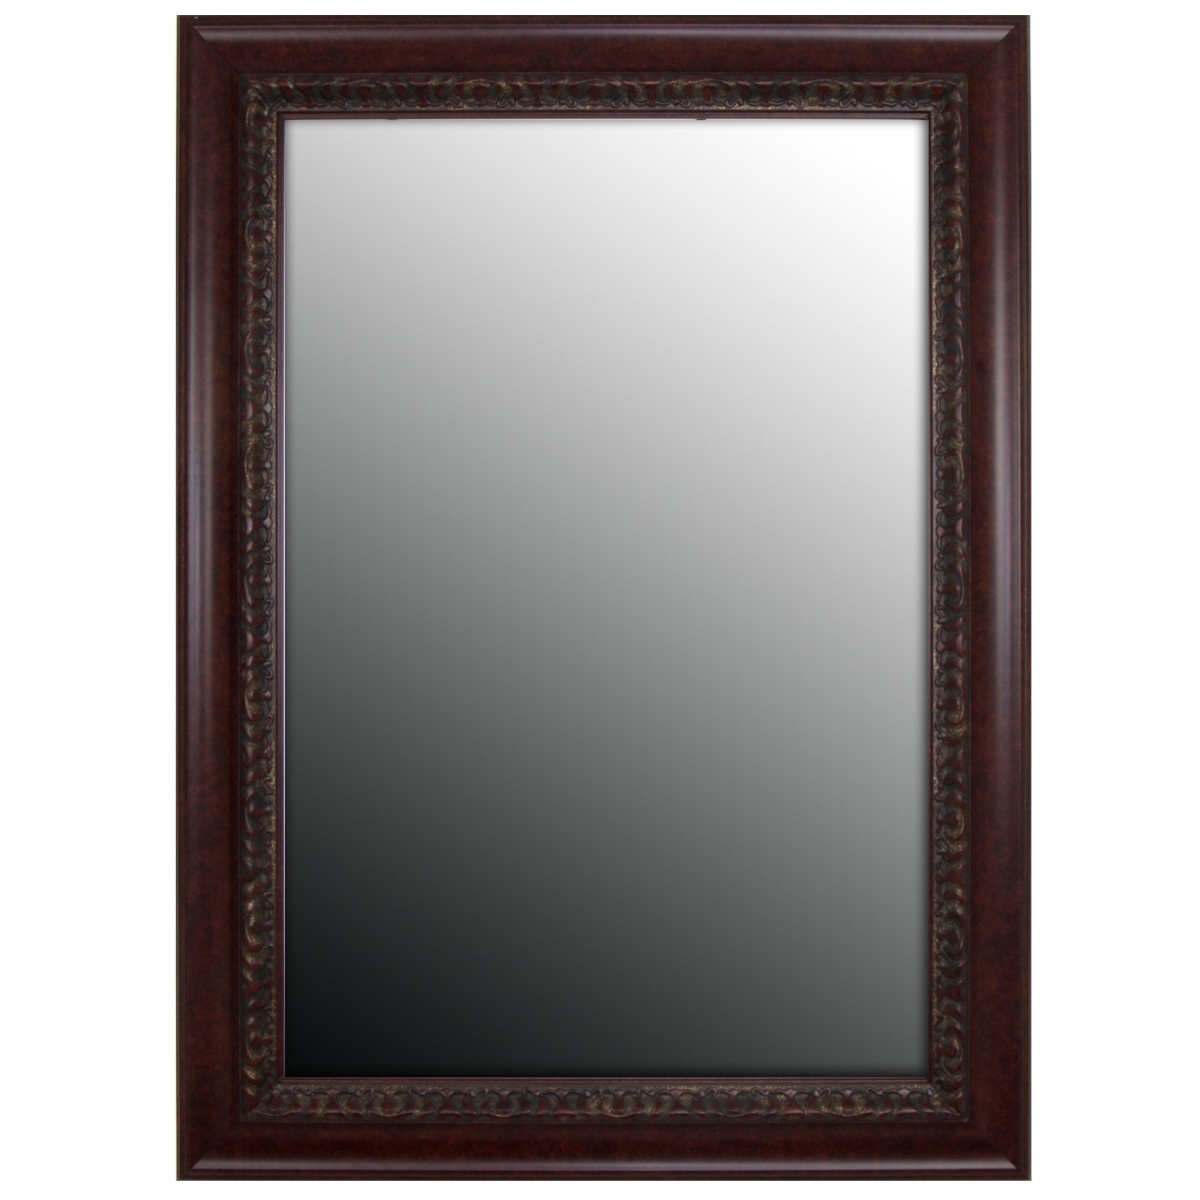 Hitchcock Butterfield 808400 Cherry Williamsburg Wall Mirror - 28 X 38 In.